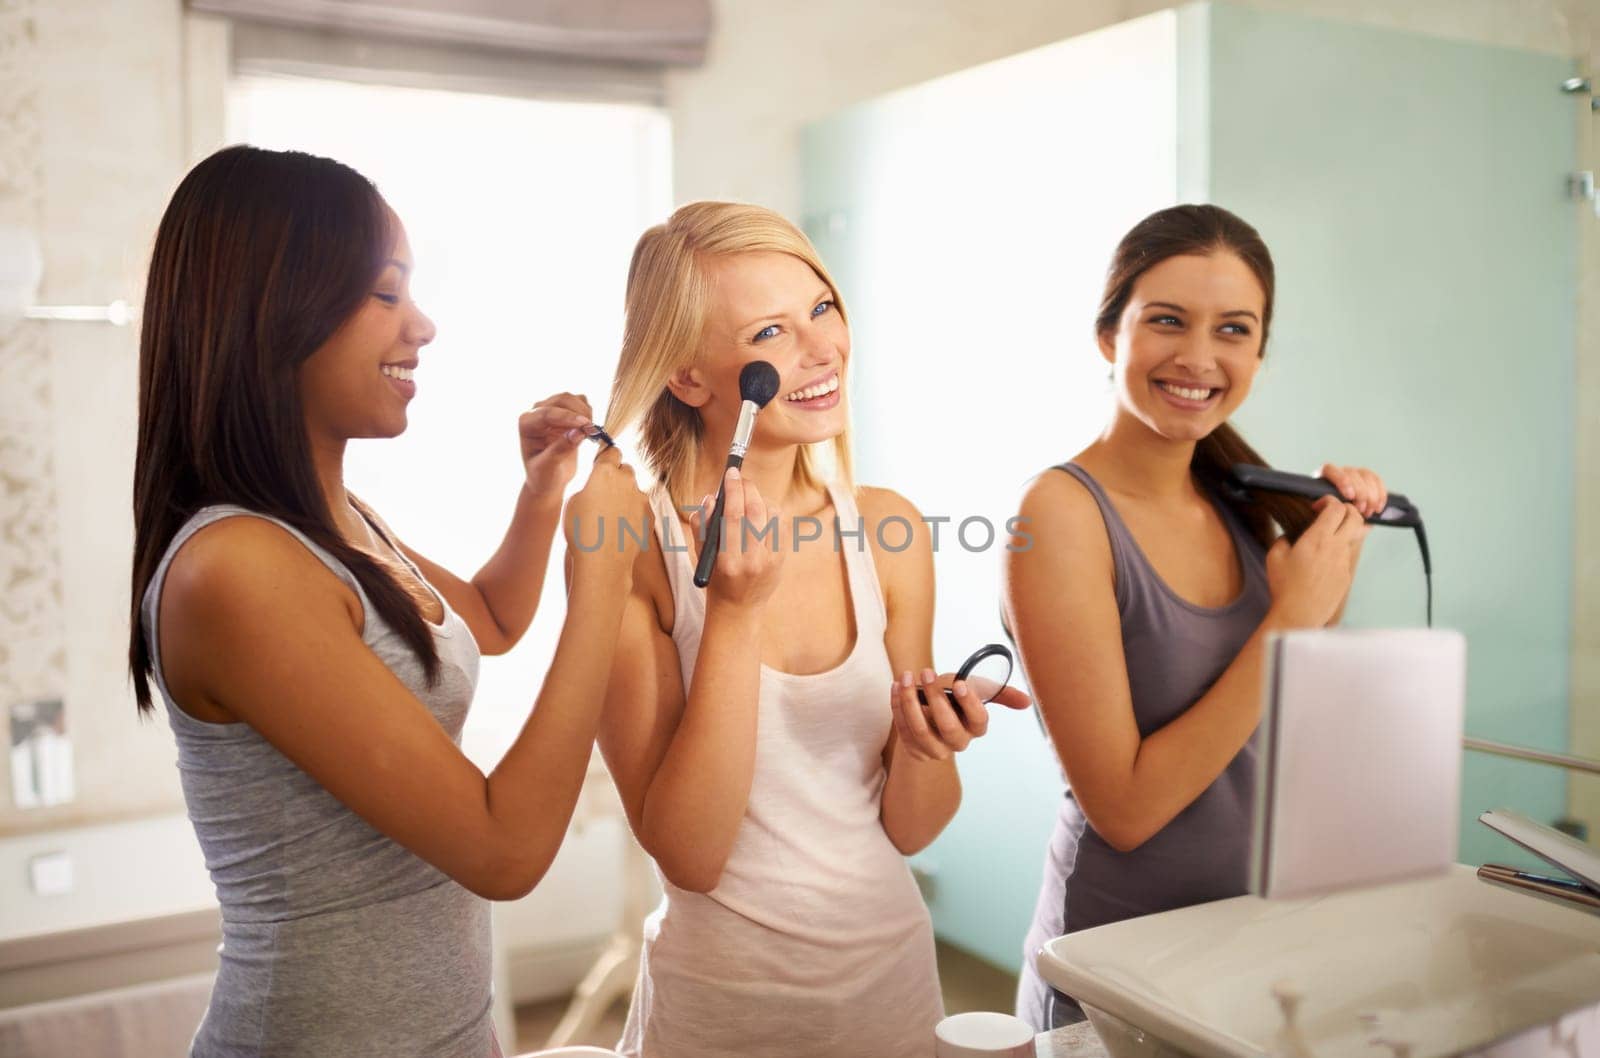 Mirror, friends and happy women in bathroom for makeup, skincare or beauty to prepare for party together at home. Group, cosmetics or smile of girls with reflection, hair straightener or laughing.